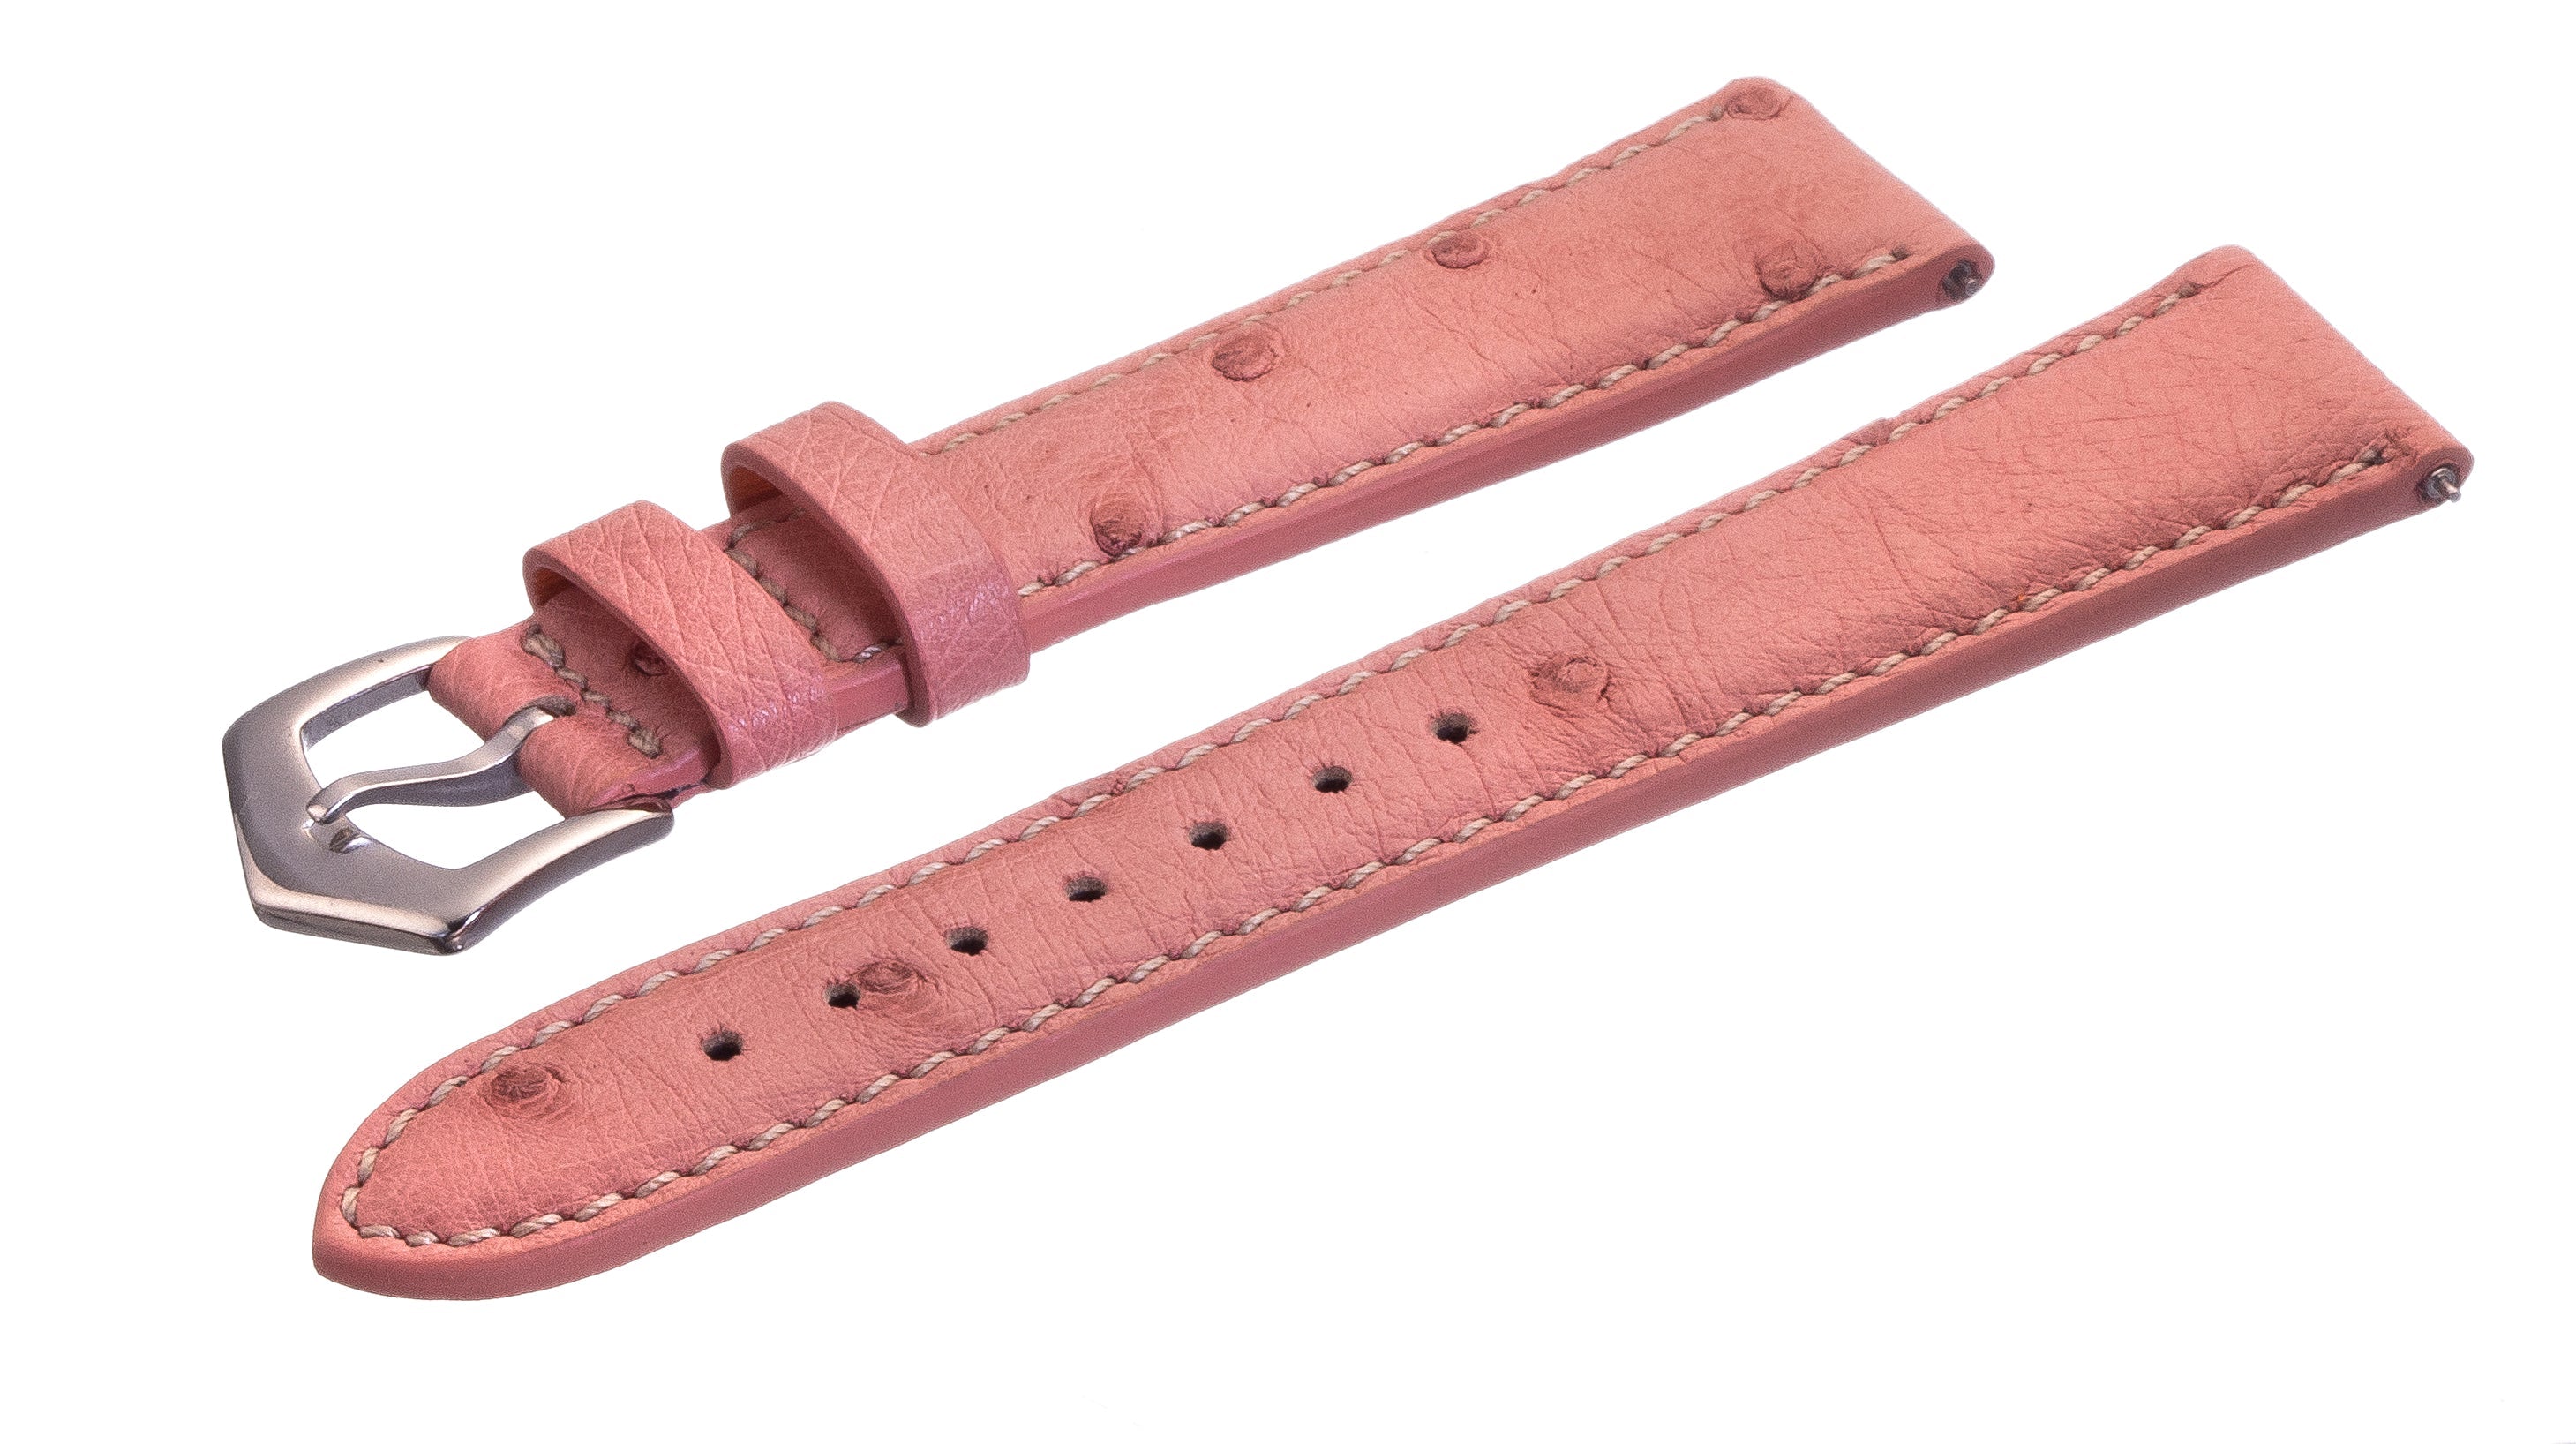 Apple Watch Leather Band ™ Pink Ostrich Leather Strap - Milano Straps